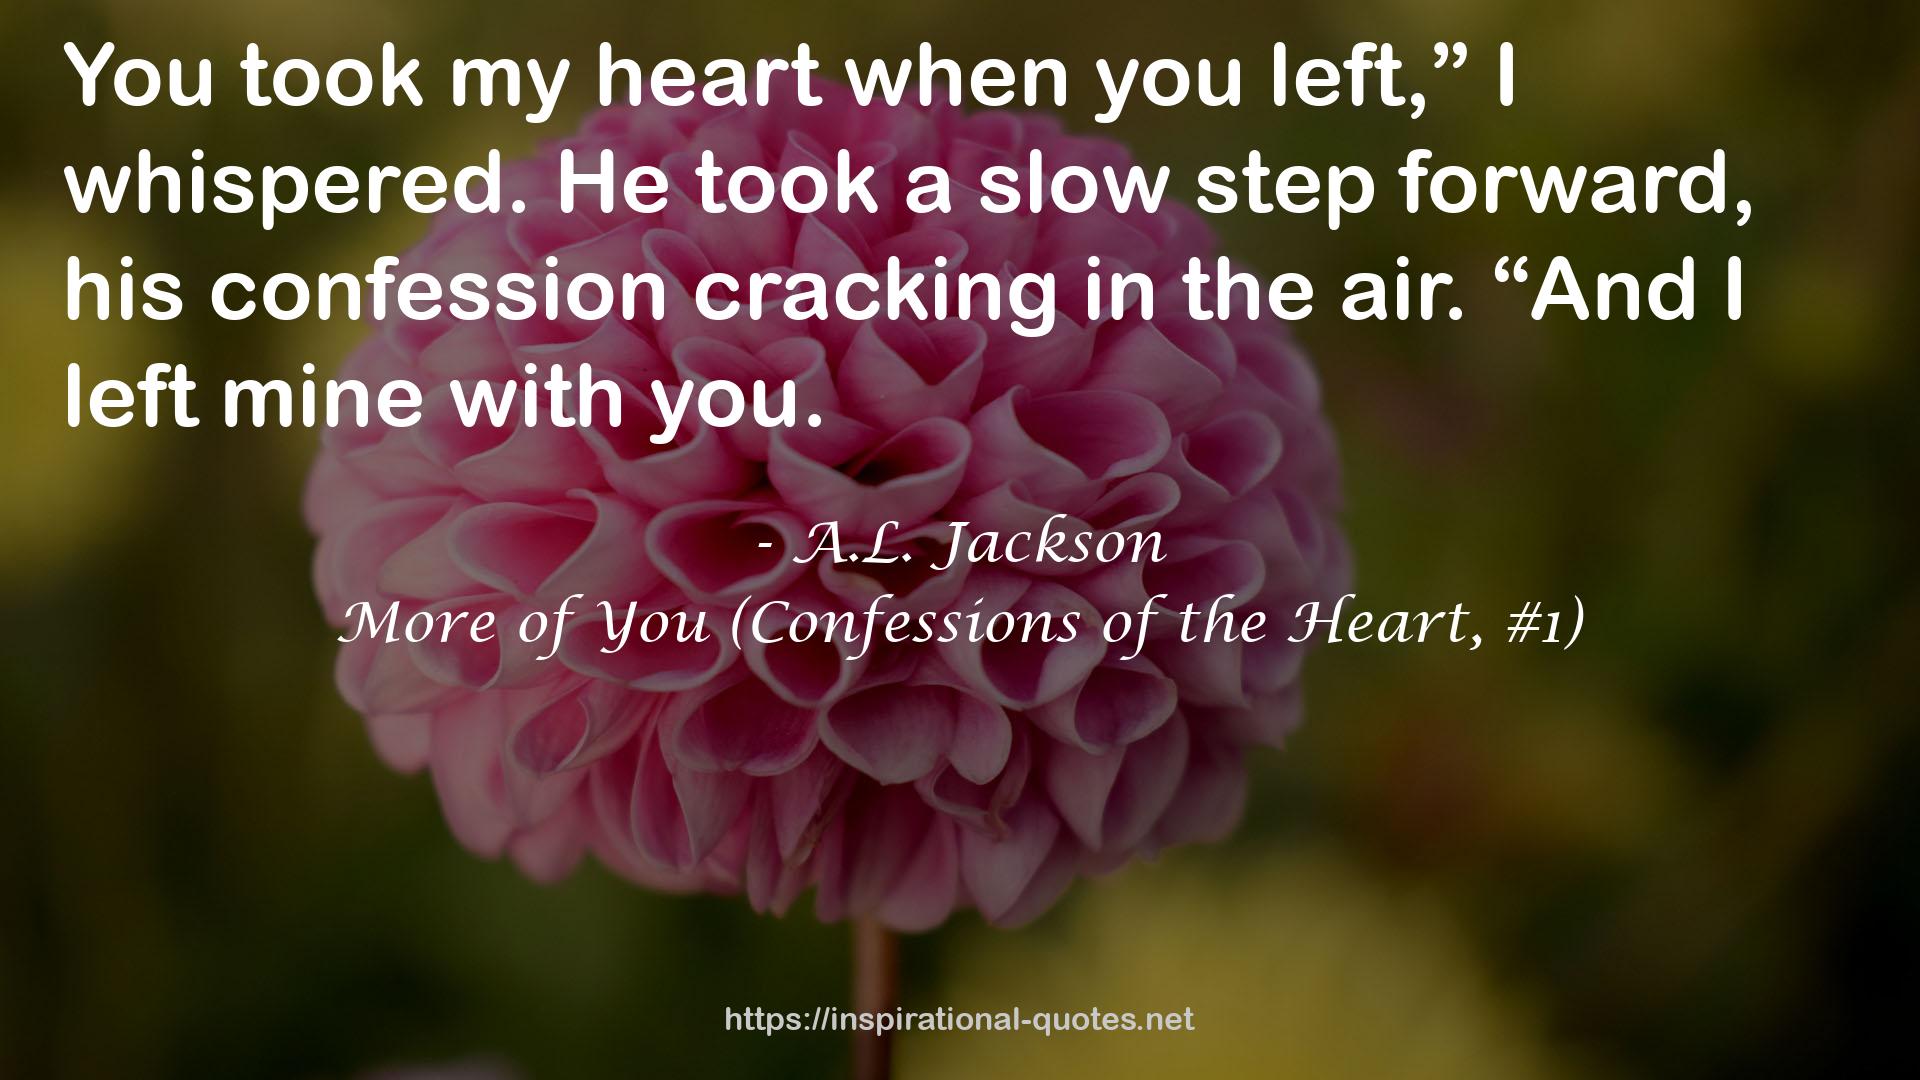 More of You (Confessions of the Heart, #1) QUOTES